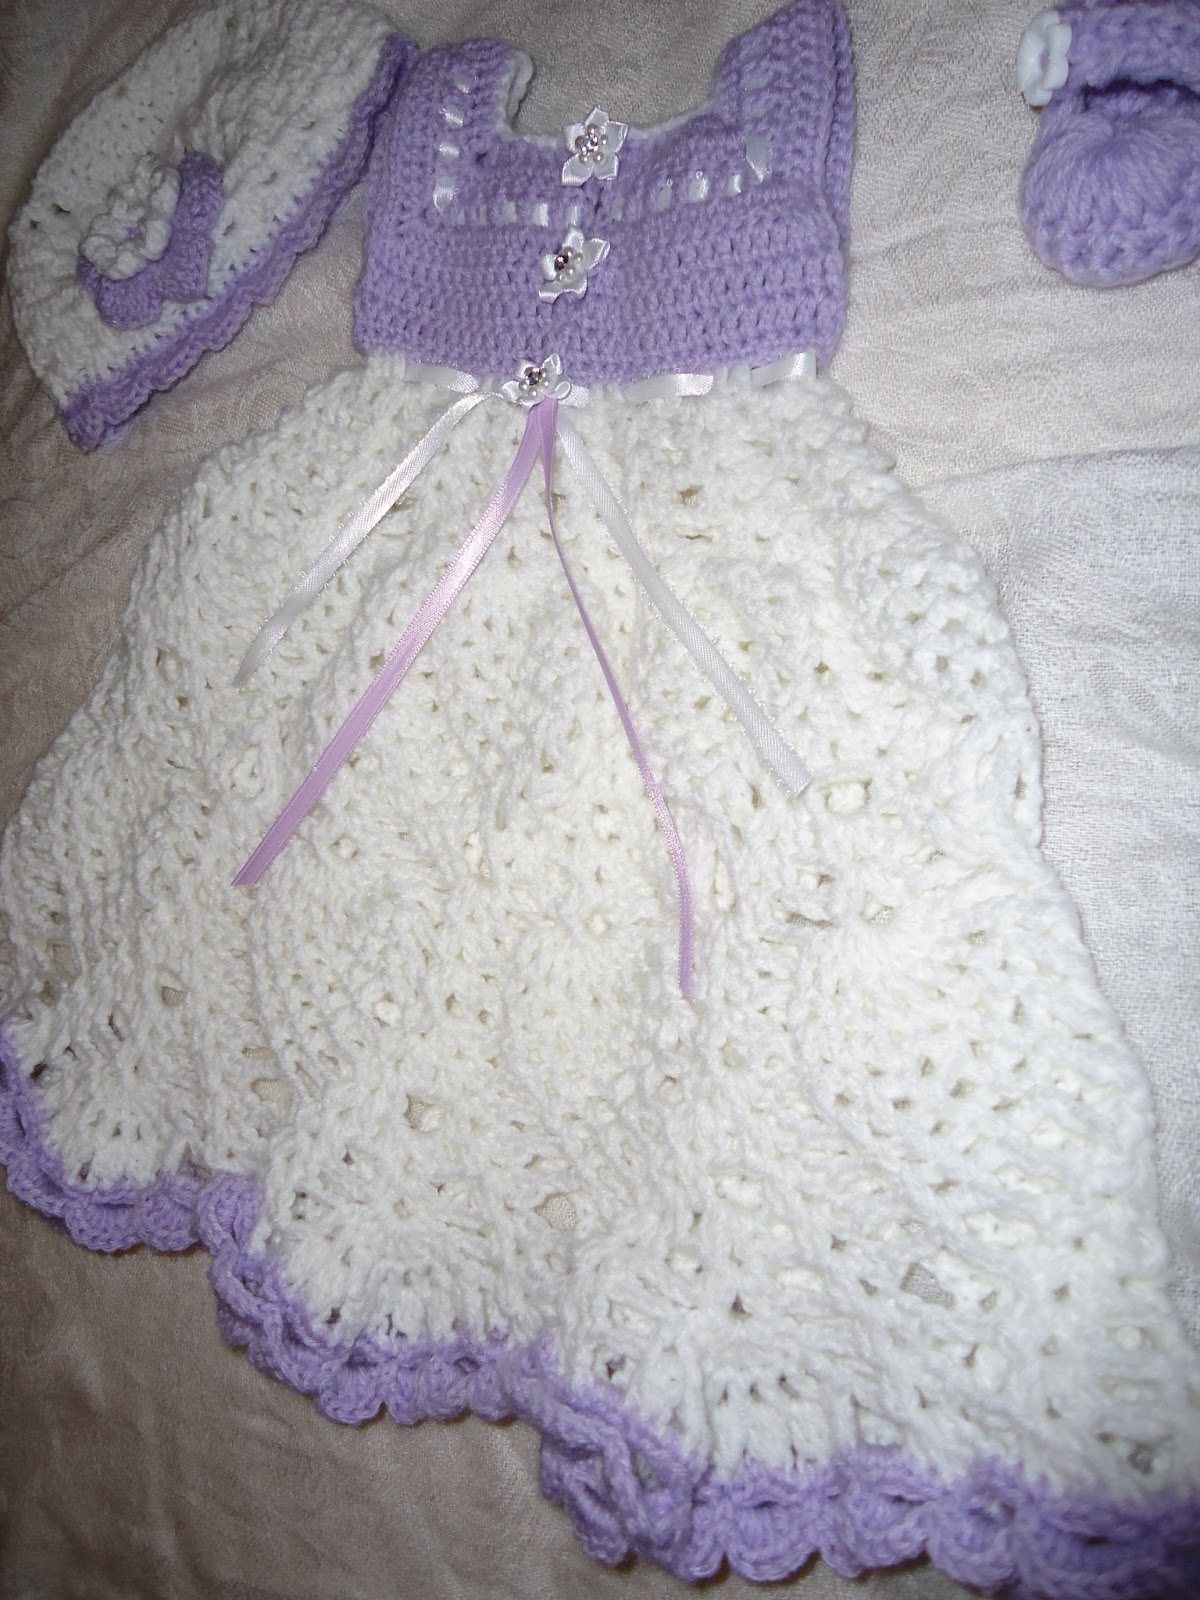 Crochetpedia: My Work - Newborn Baby Girl Outfit, Dress, hat and shoes